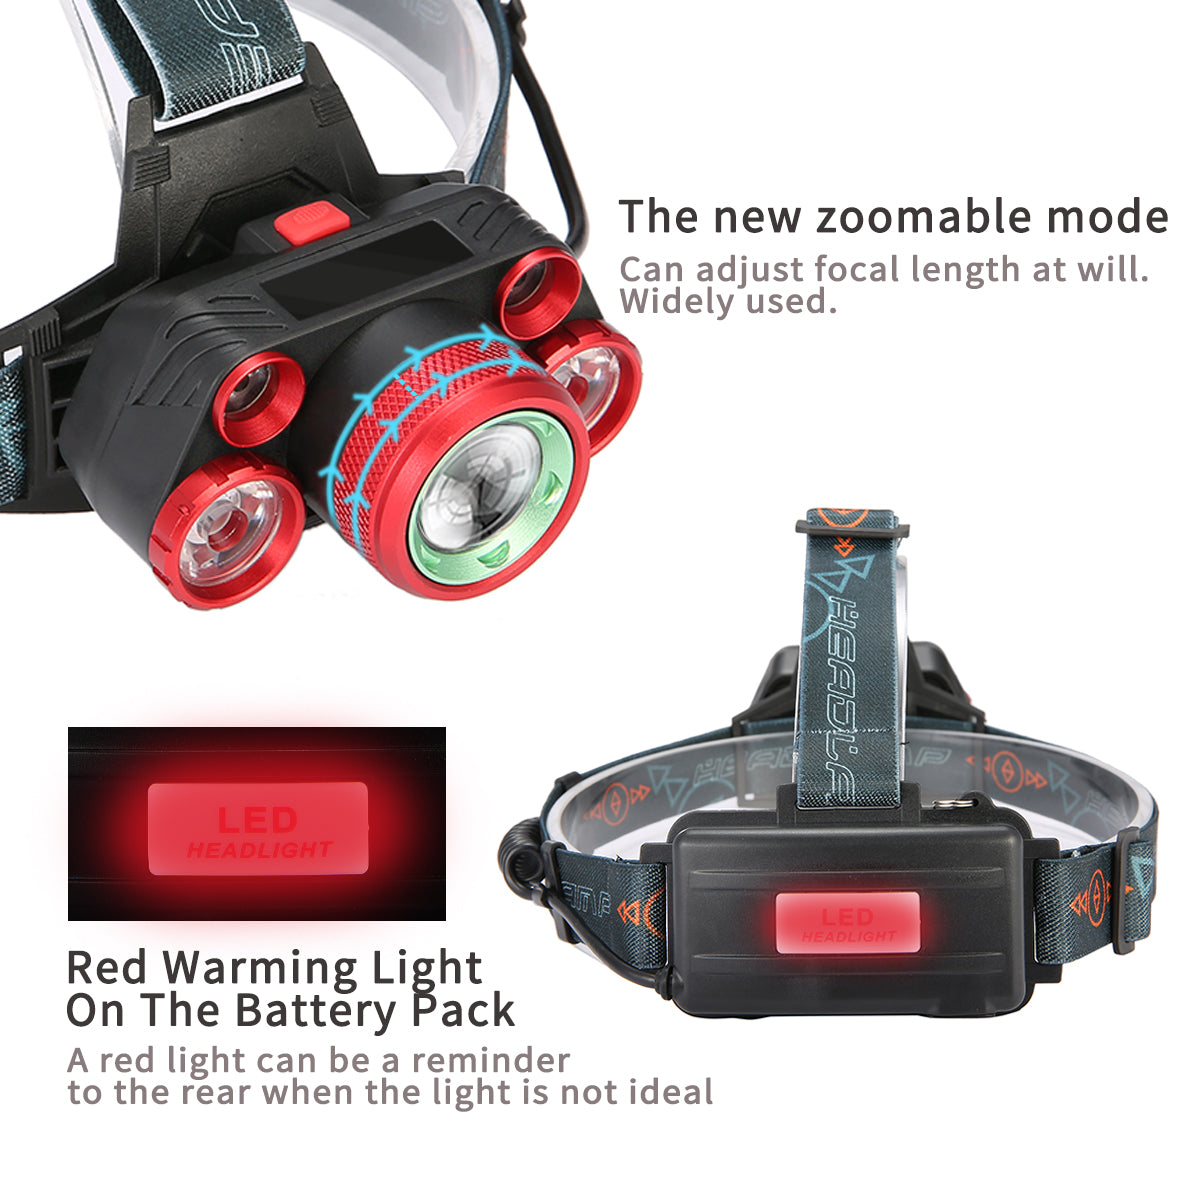 1000LM 5 LED Headlight 5 Modes Adjustable Flashlight IPX6 Waterproof Rechargeable Work Lamp Outdoor Camping Cycling